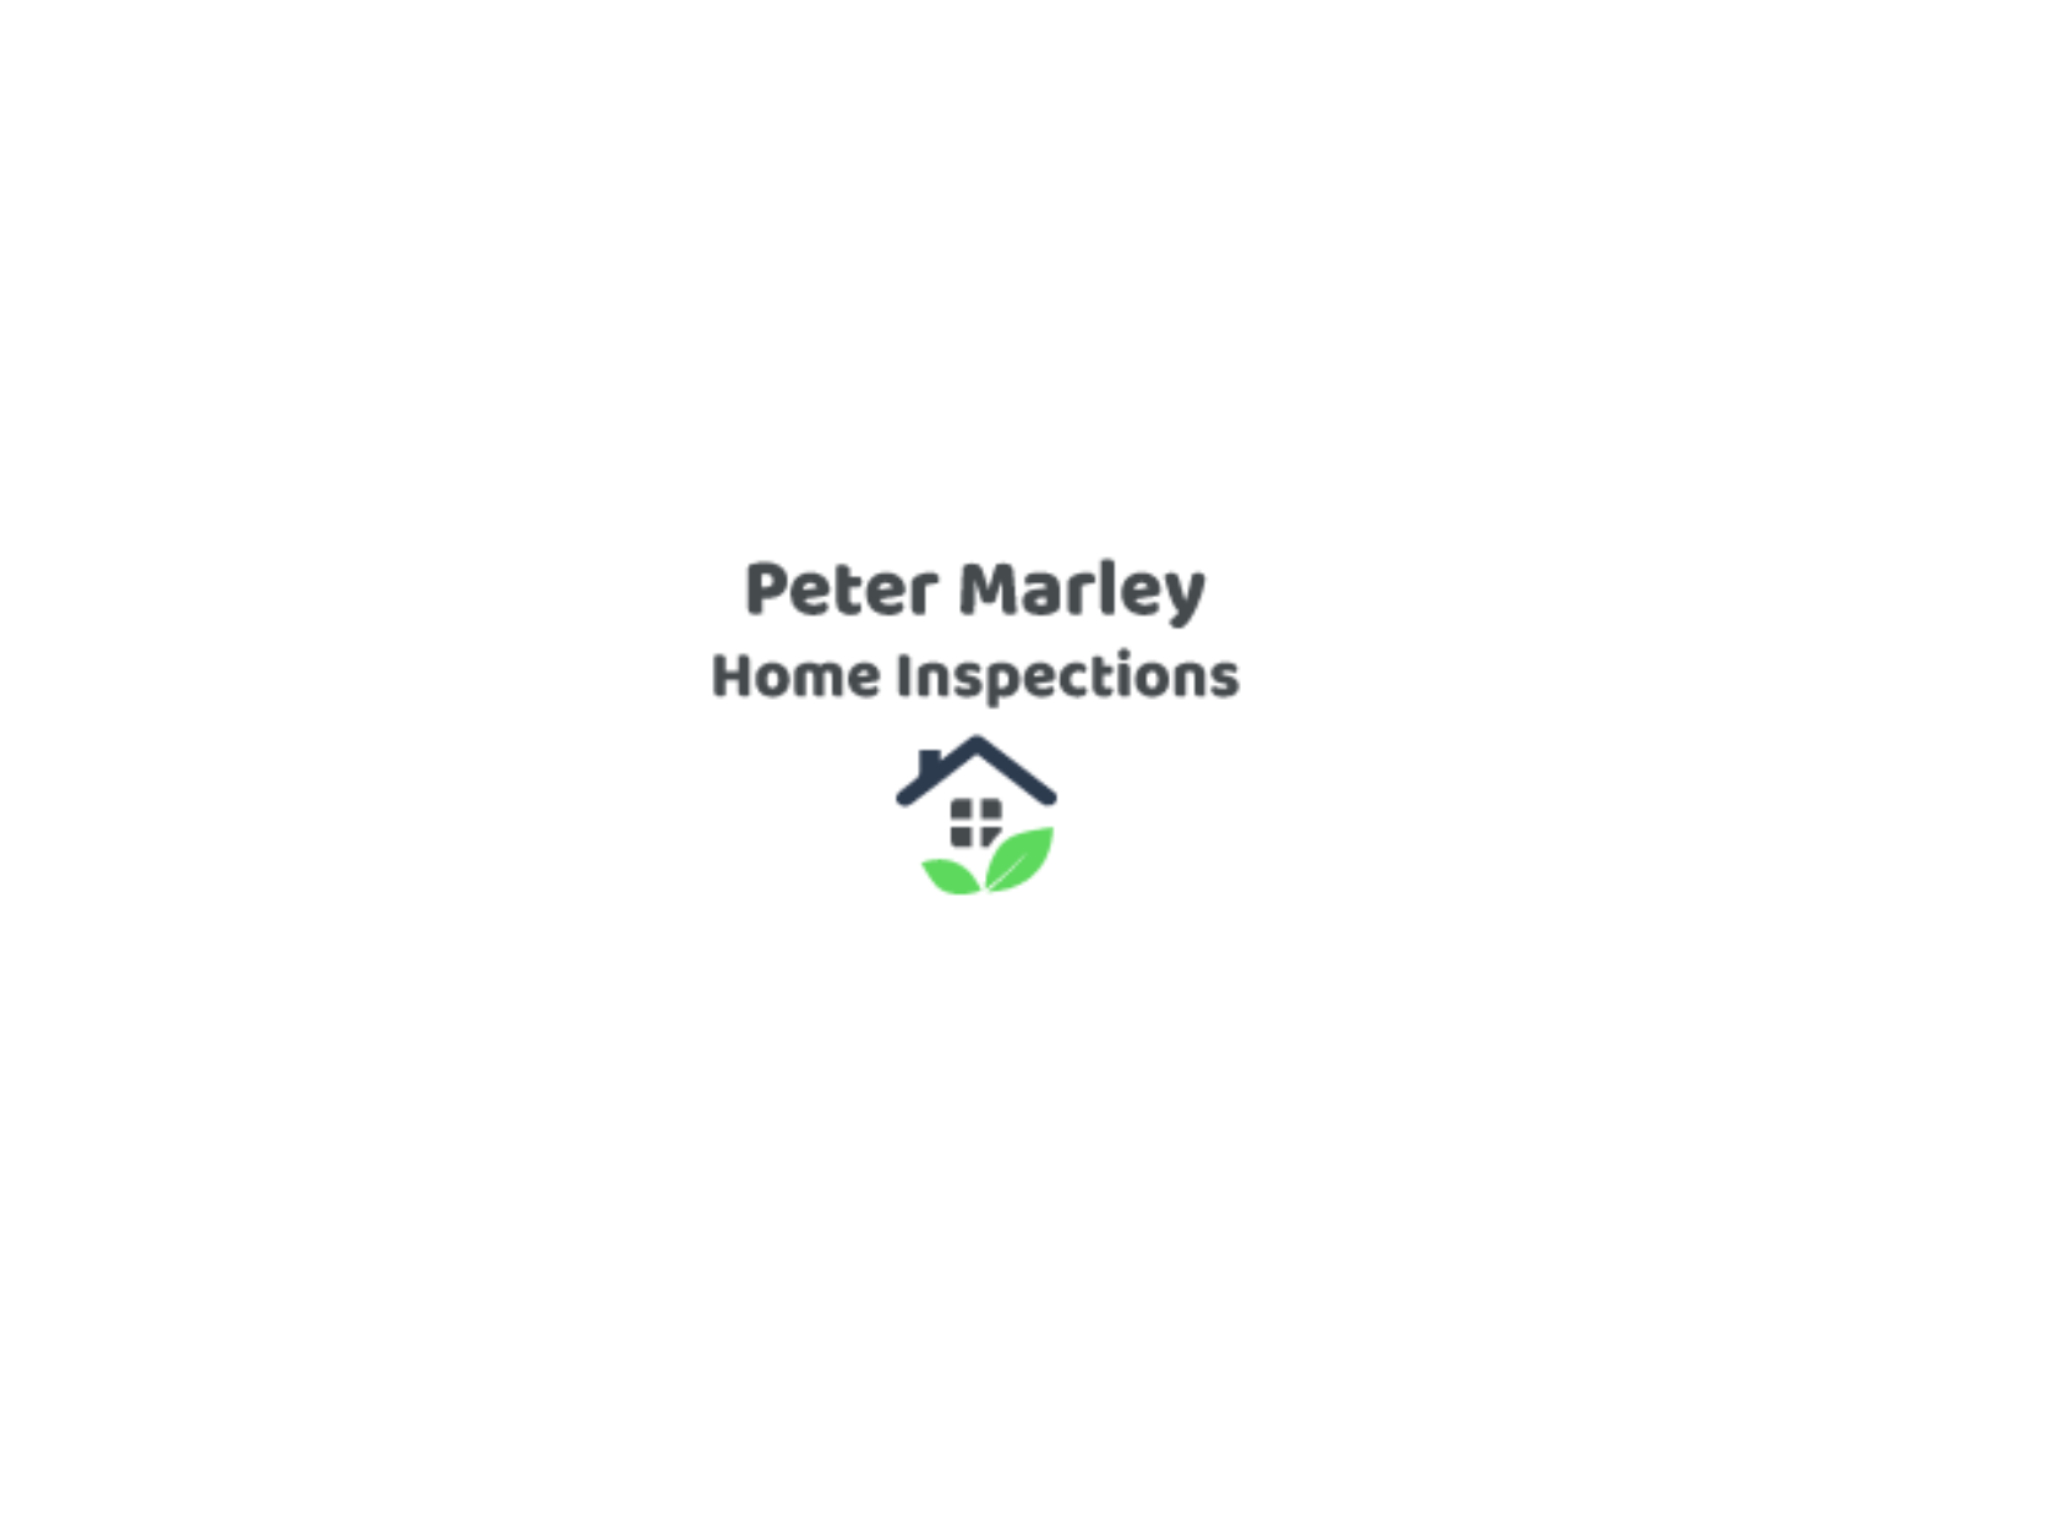 Peter Marley Home Inspections Logo